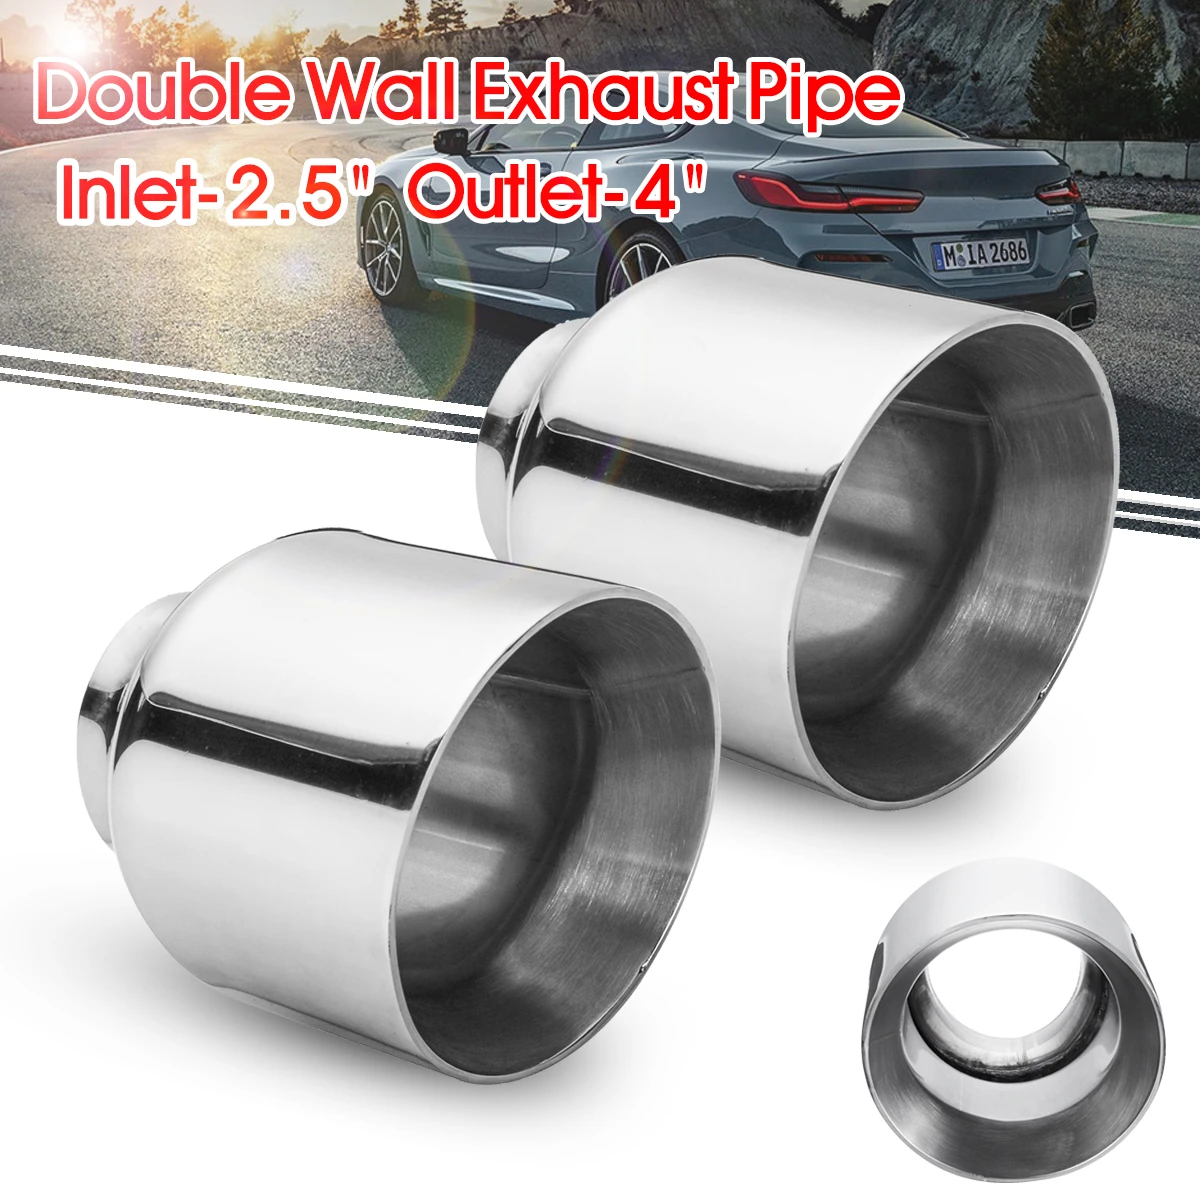 Pair Stainless Steel Exhaust Tips 2.5" Inlet 3" Out Dual Wall With 2 Clamps